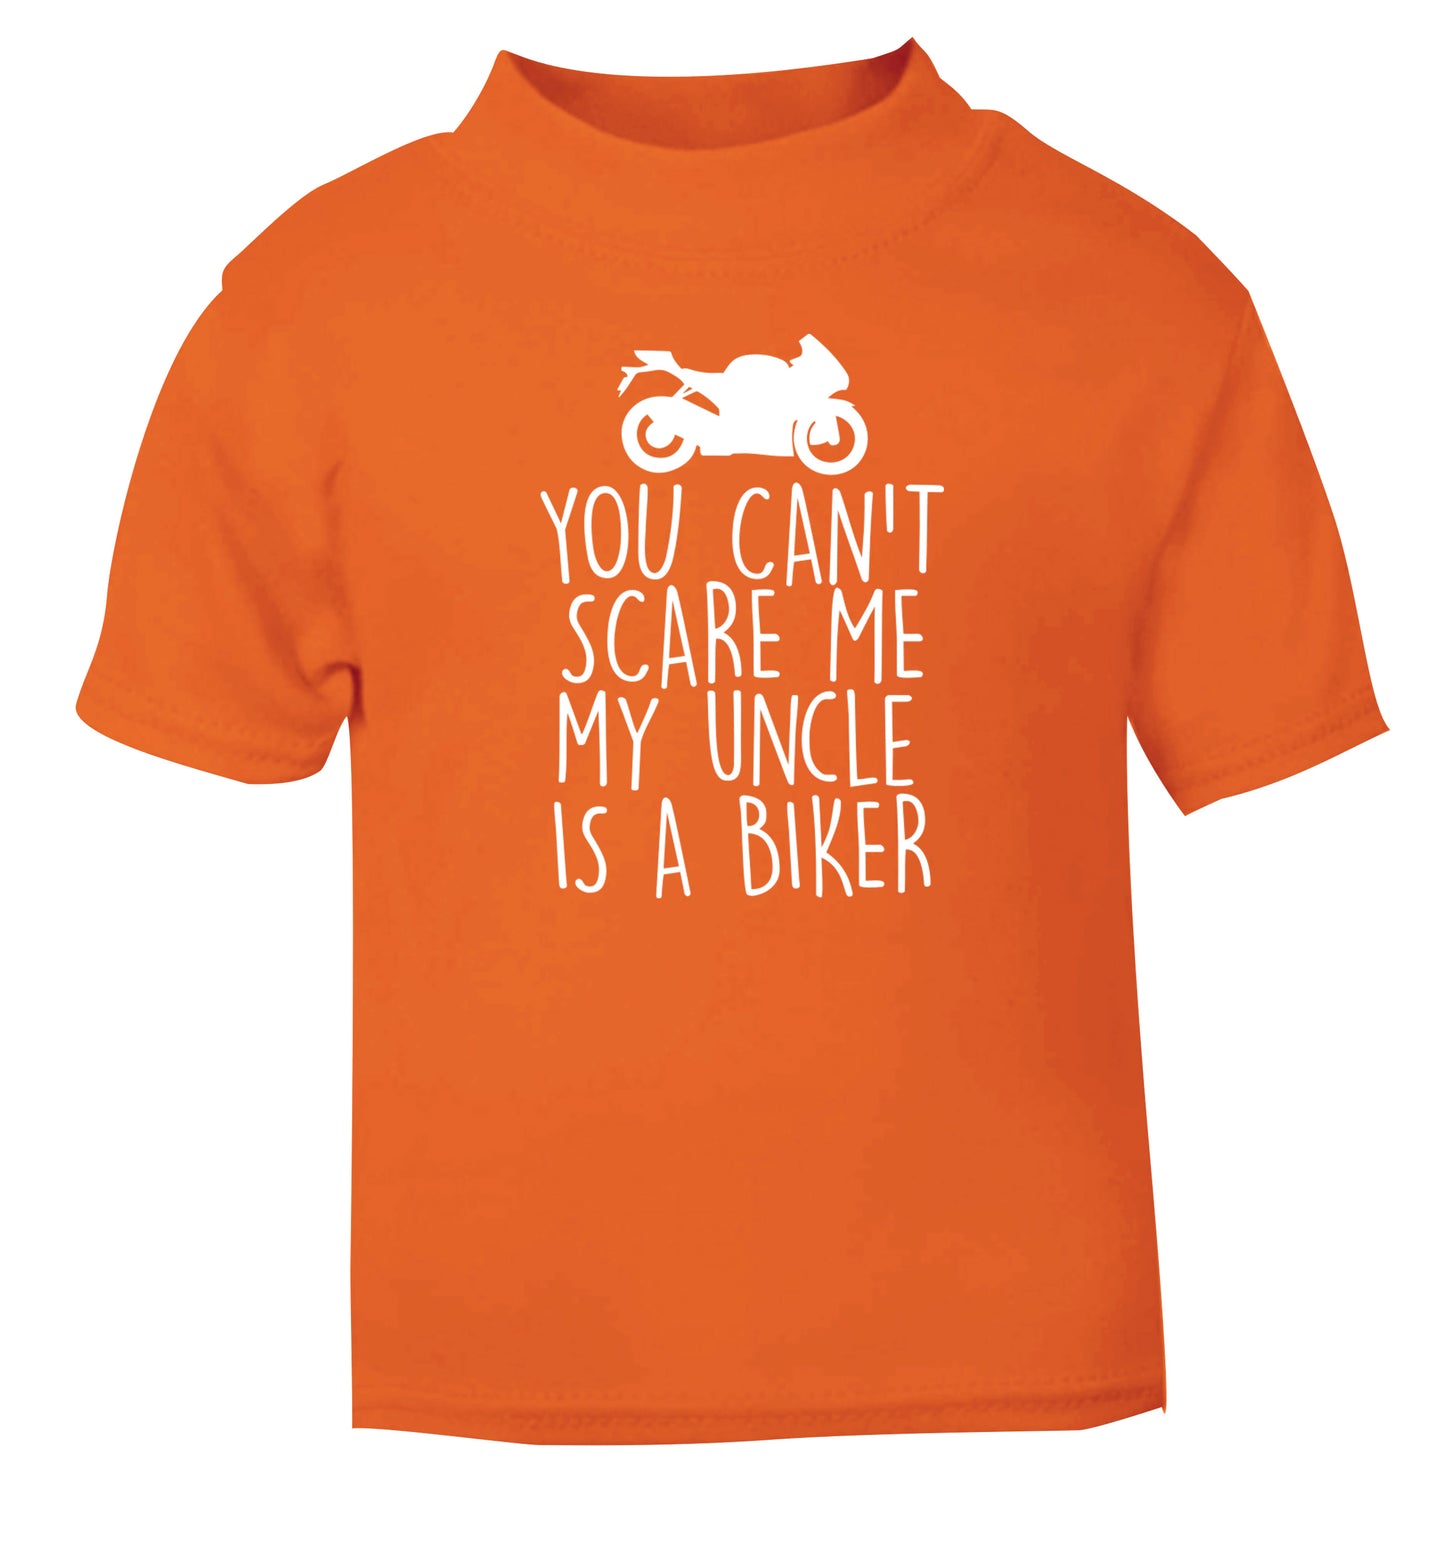 You can't scare me my uncle is a biker orange Baby Toddler Tshirt 2 Years